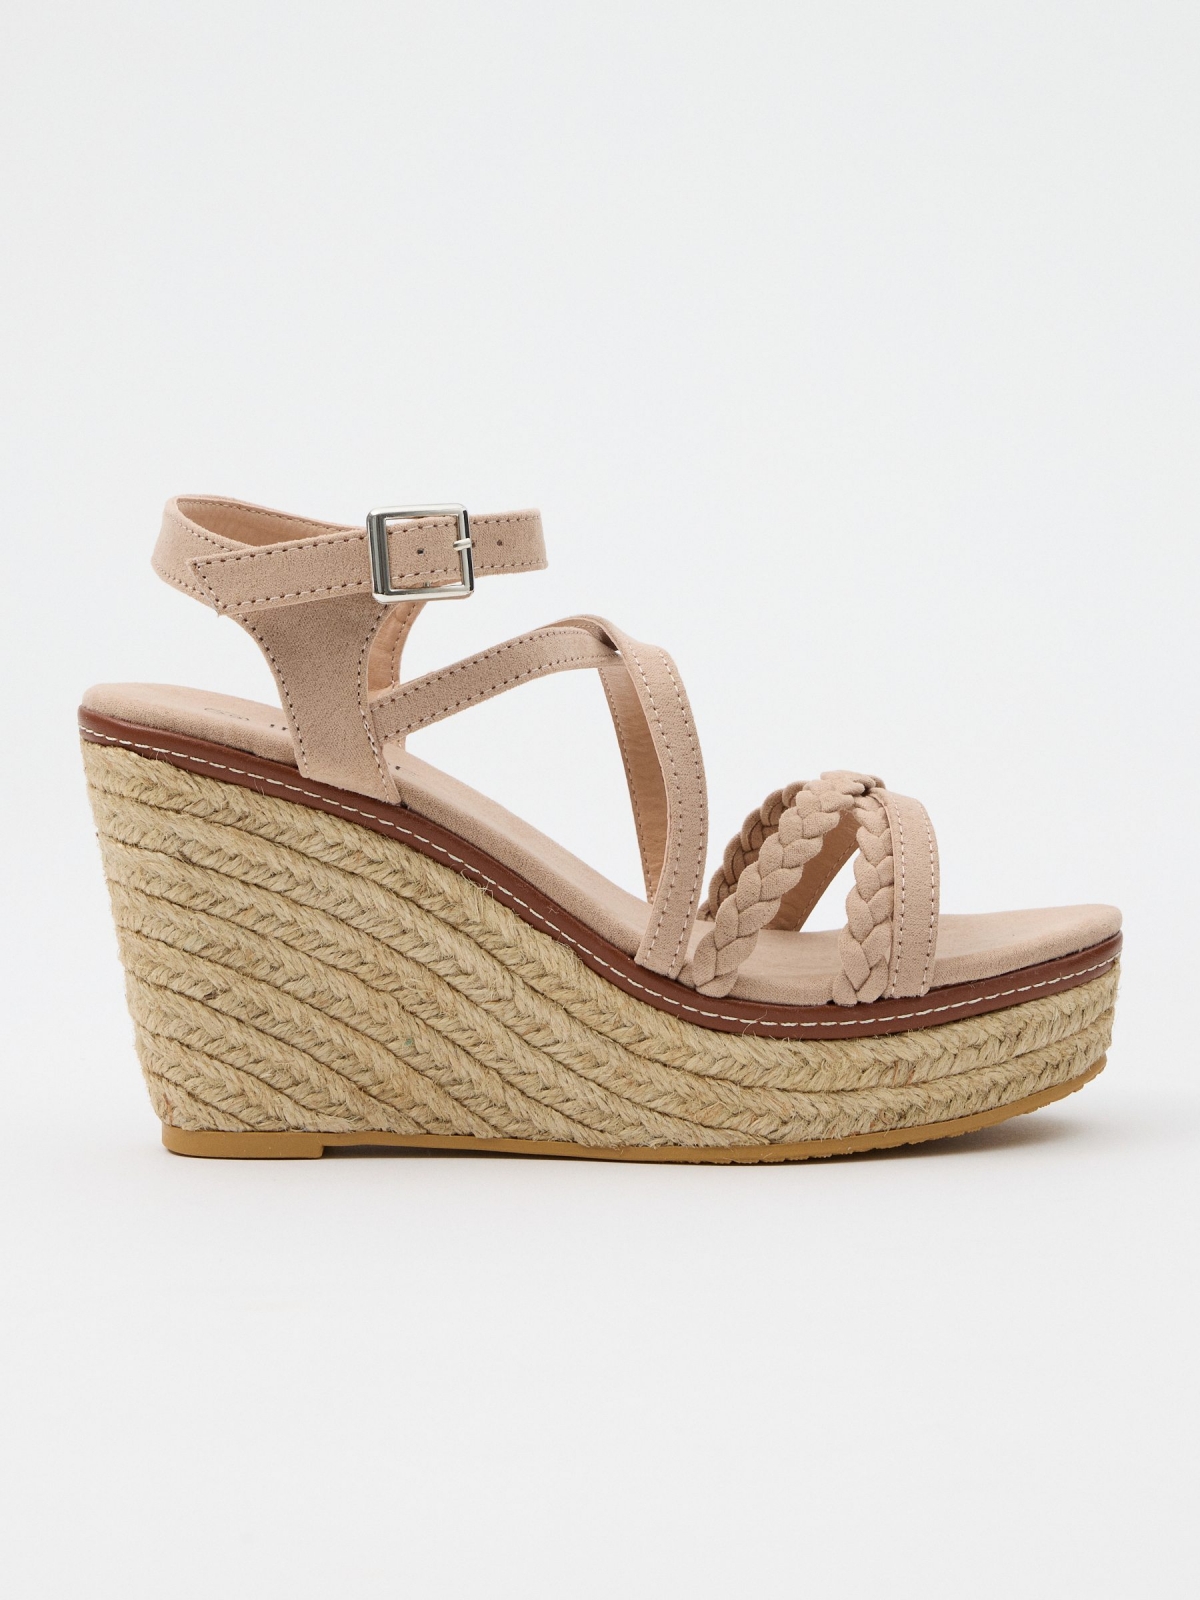 Jute wedge crossed with braided straps powdered pink